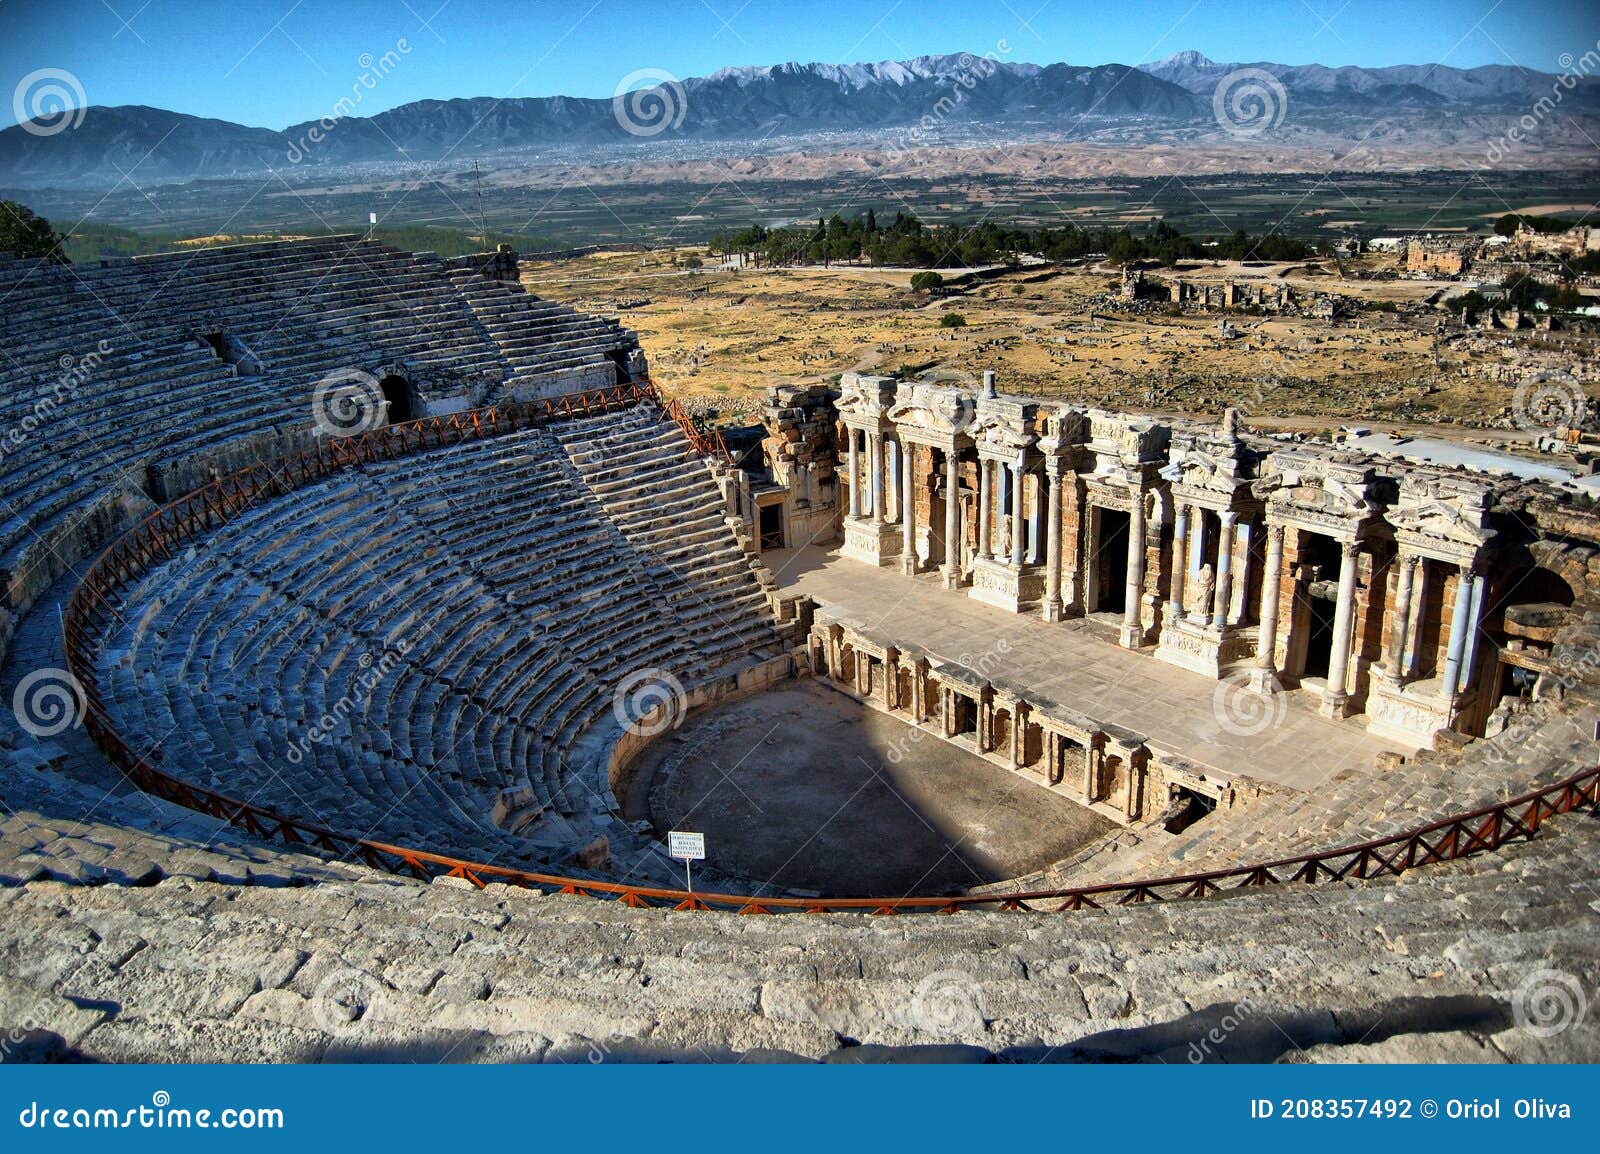 panoramic view of the ancient roman ruins of the theater of hierapolis (anatolia  turkey).